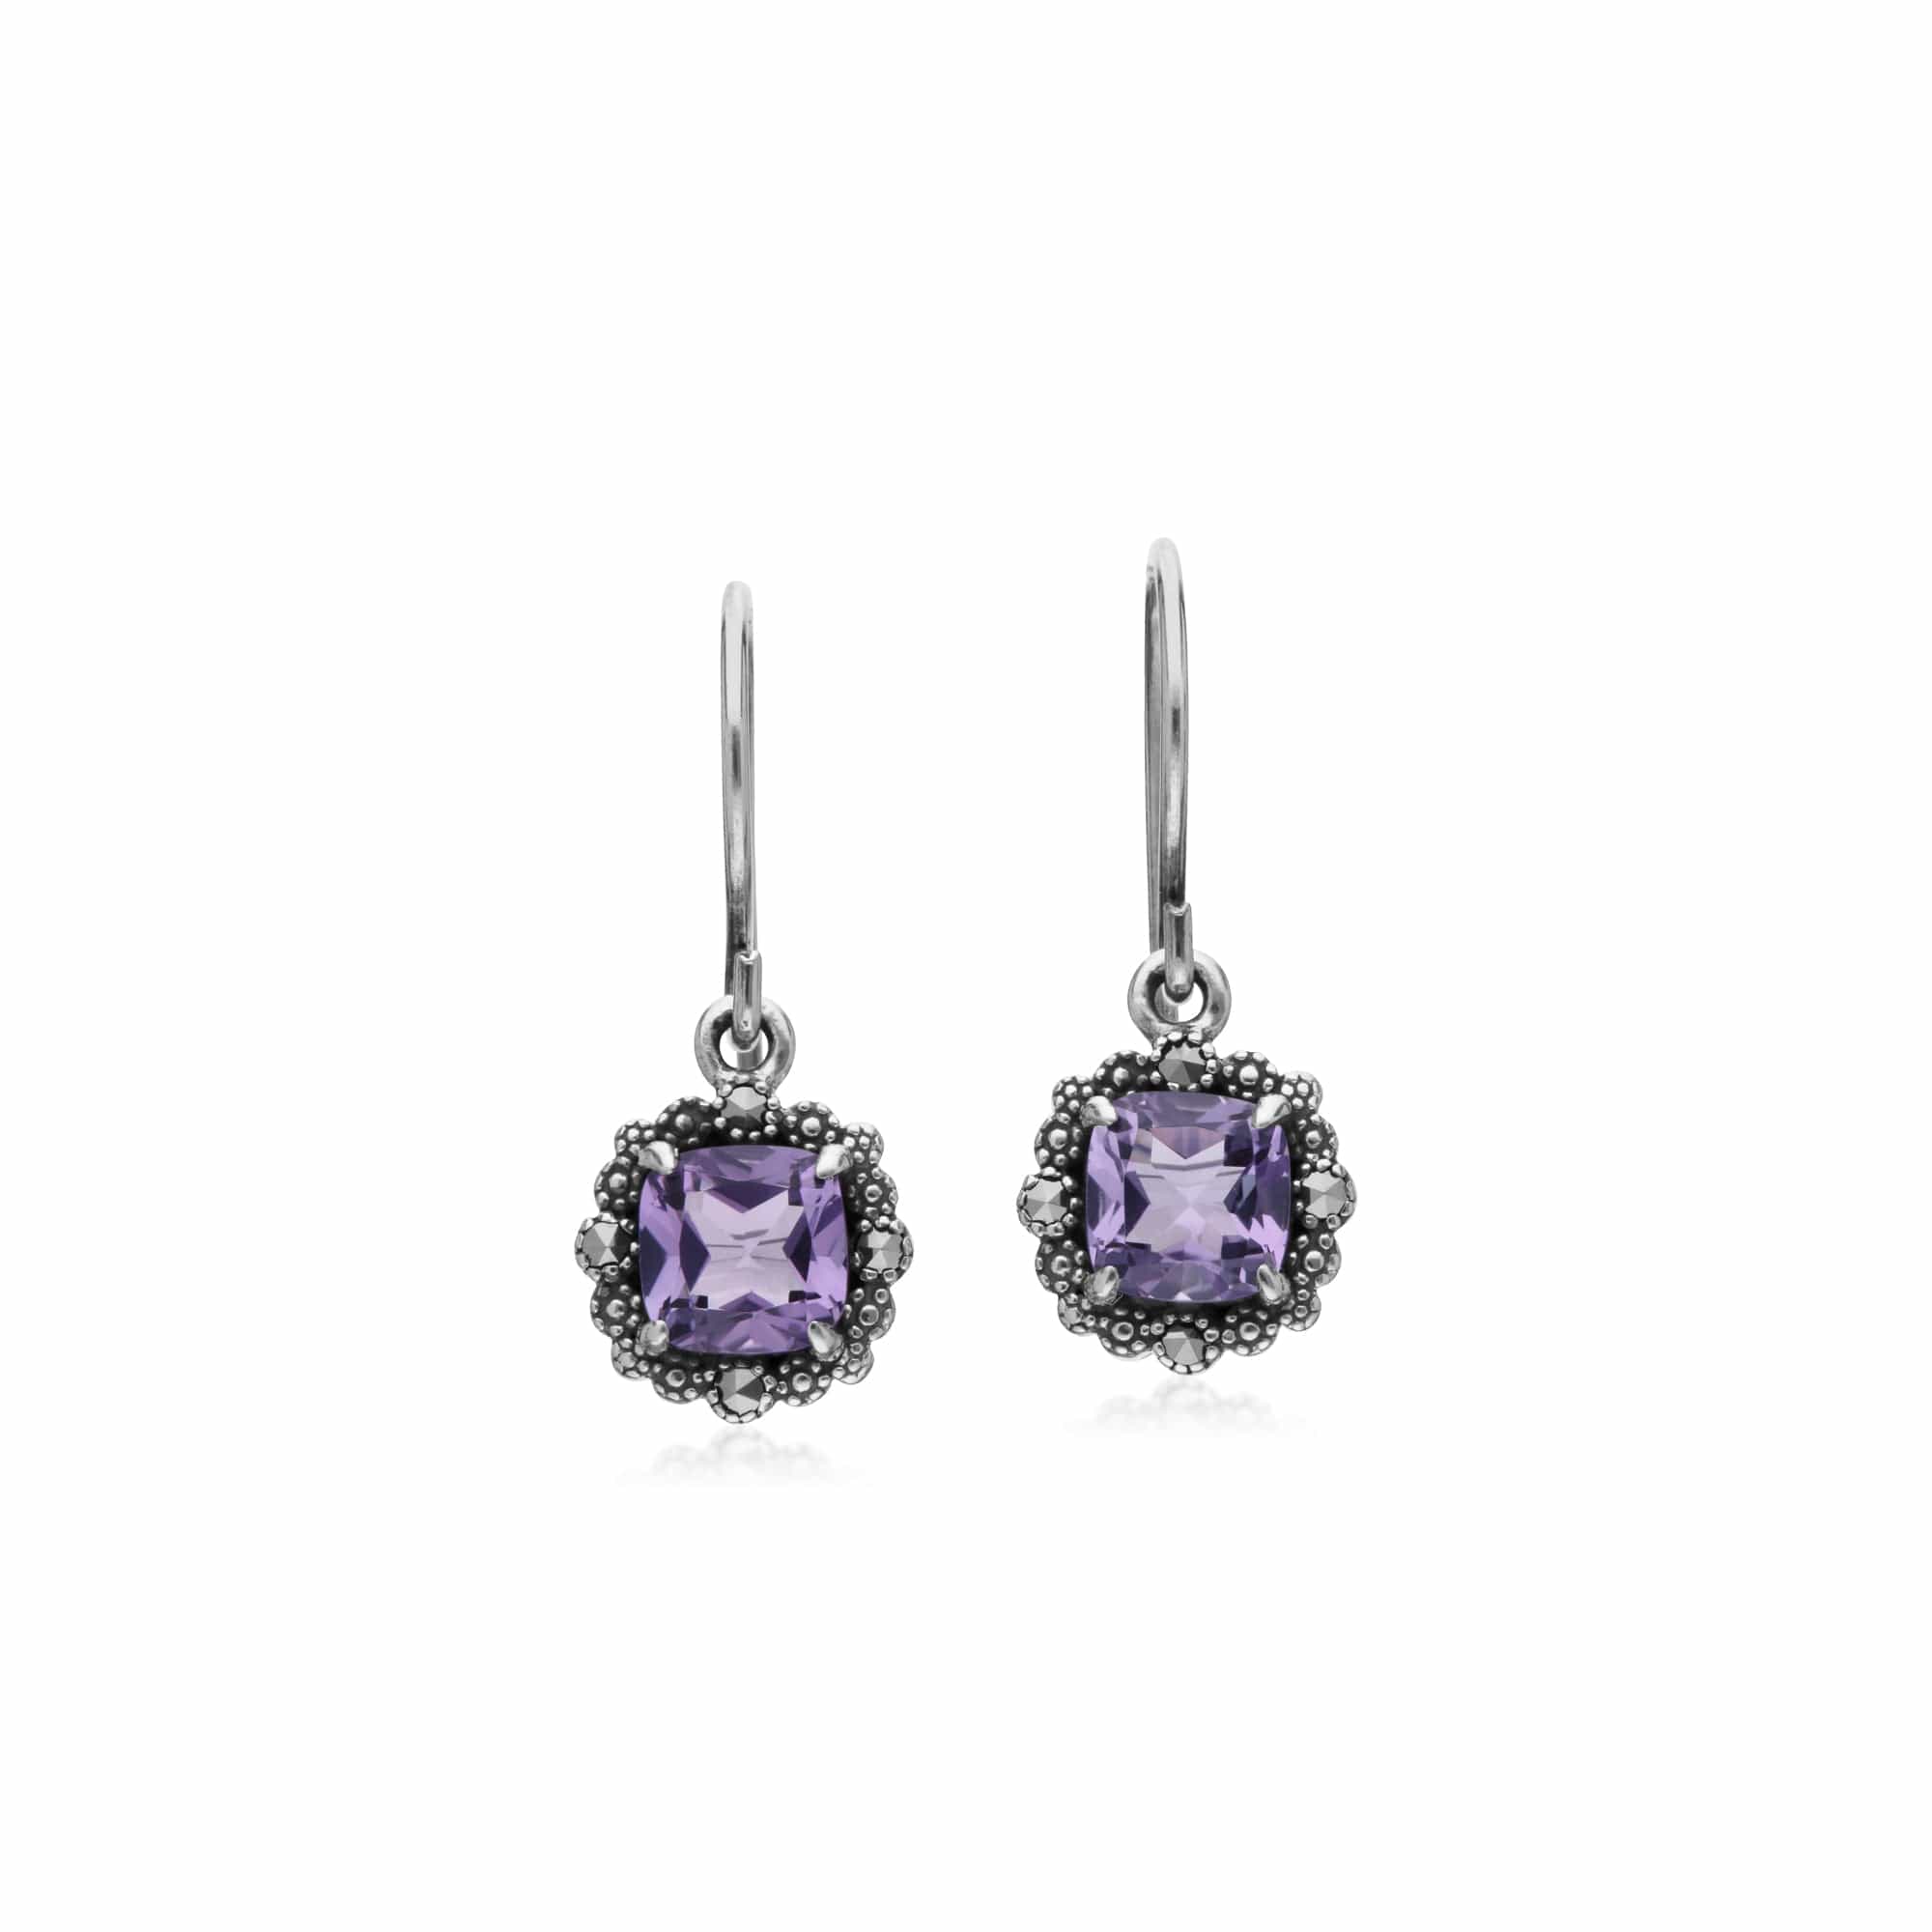 214E870902925 Art Deco Style Square Cushion Amethyst & Marcasite Drop Earrings in 925 Sterling Silver 1